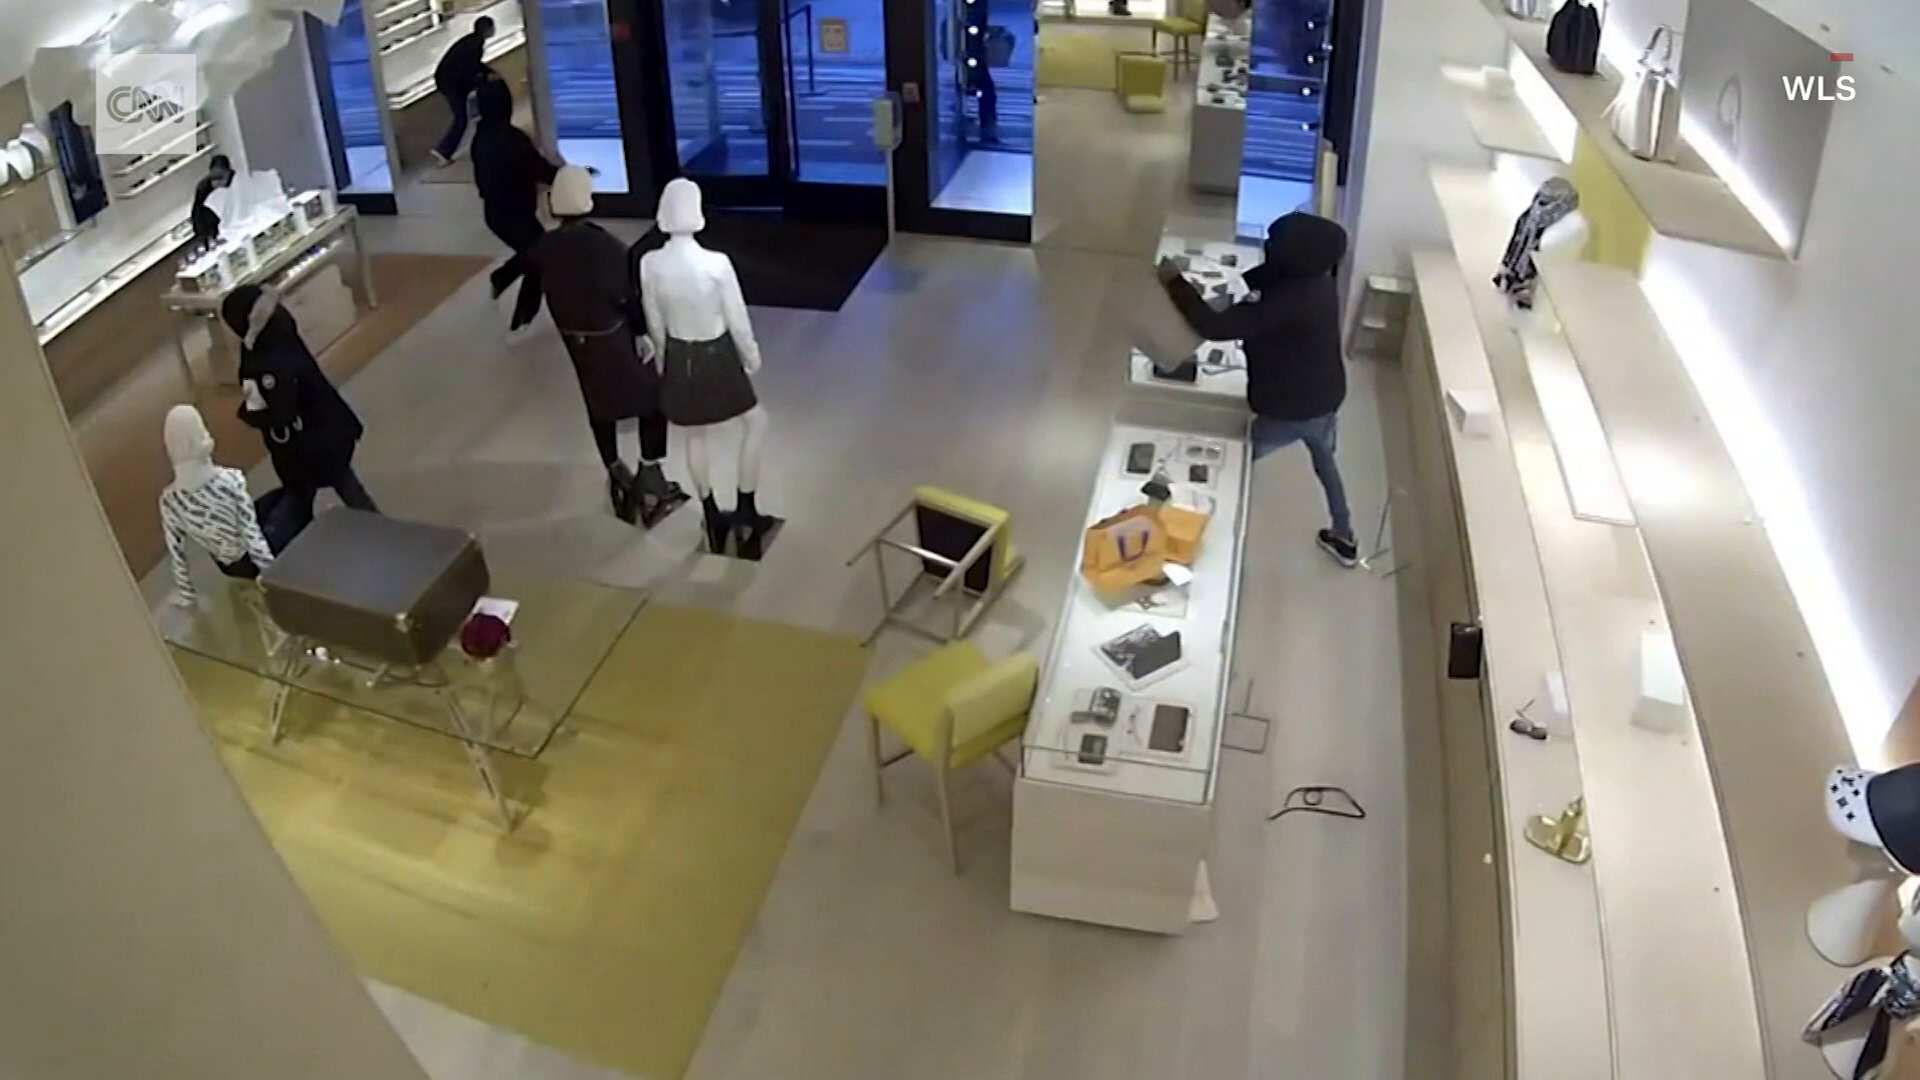 Oak Brook, Illinois, Louis Vuitton: 14 people rushed into a store